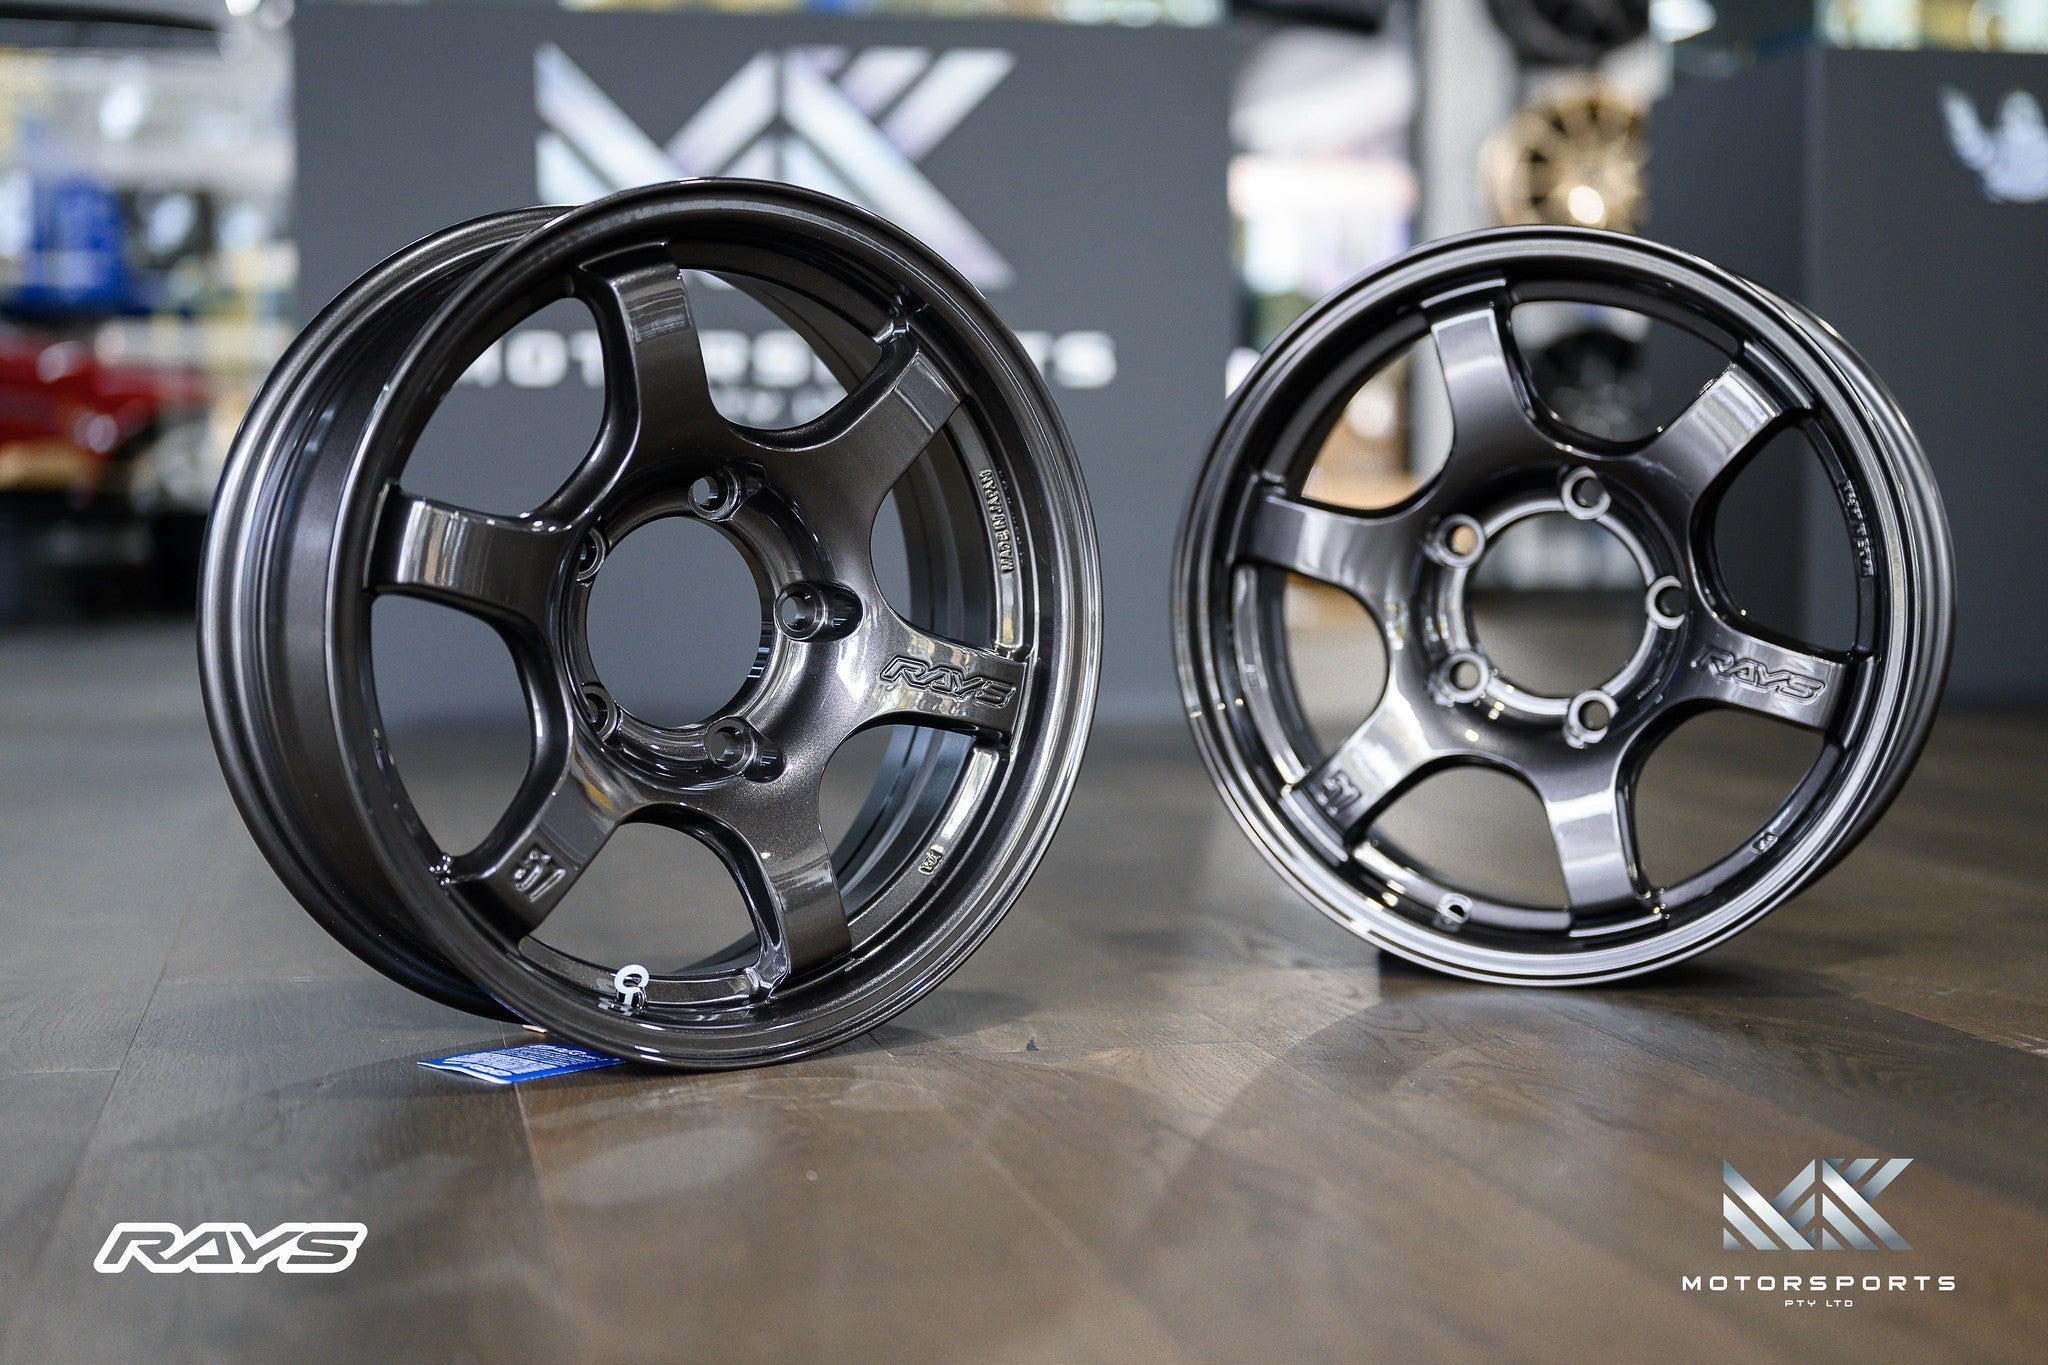 gramLIGHTS 57DR-X - Premium Wheels from Gram Lights - From just $2190.00! Shop now at MK MOTORSPORTS